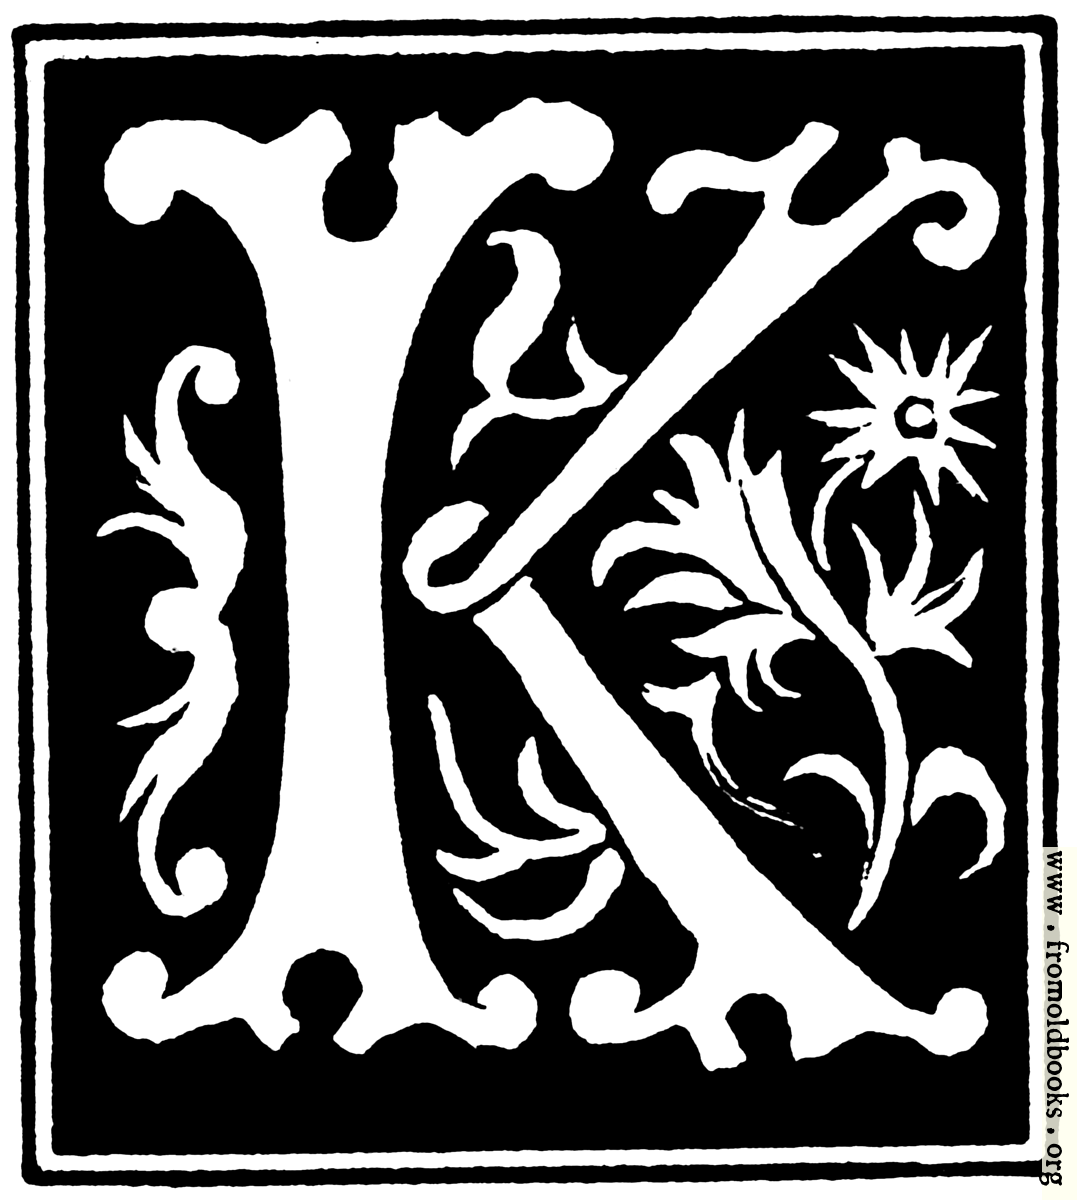 [Picture: Decorative initial letter “K” from 16th Century]